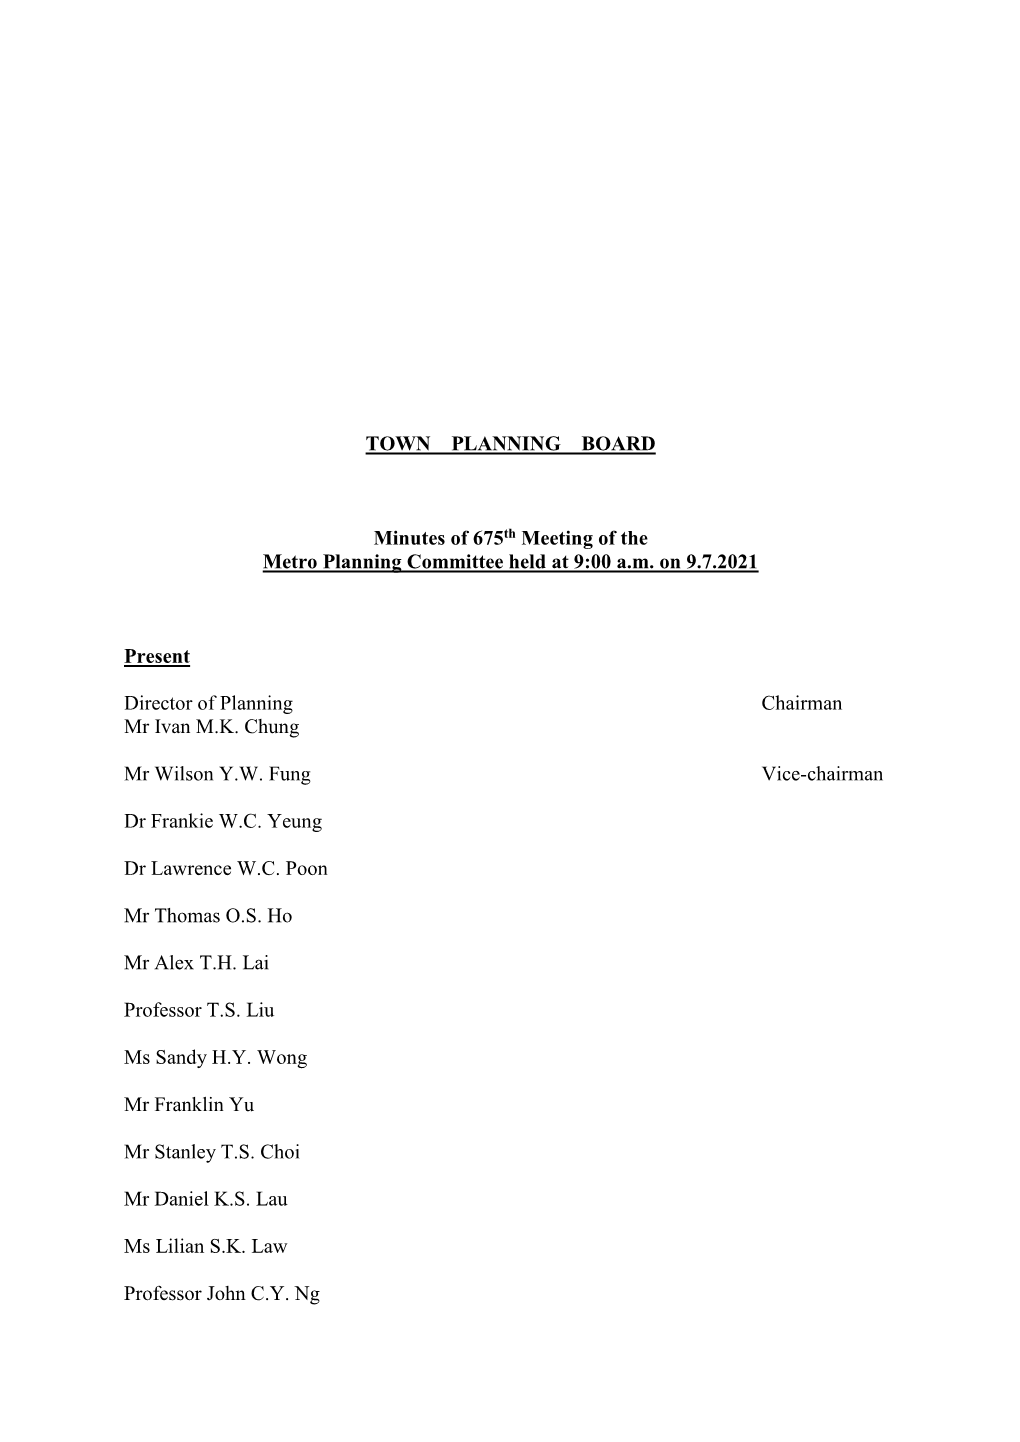 Minutes of 675Th Meeting of the Rural and New Town Planning